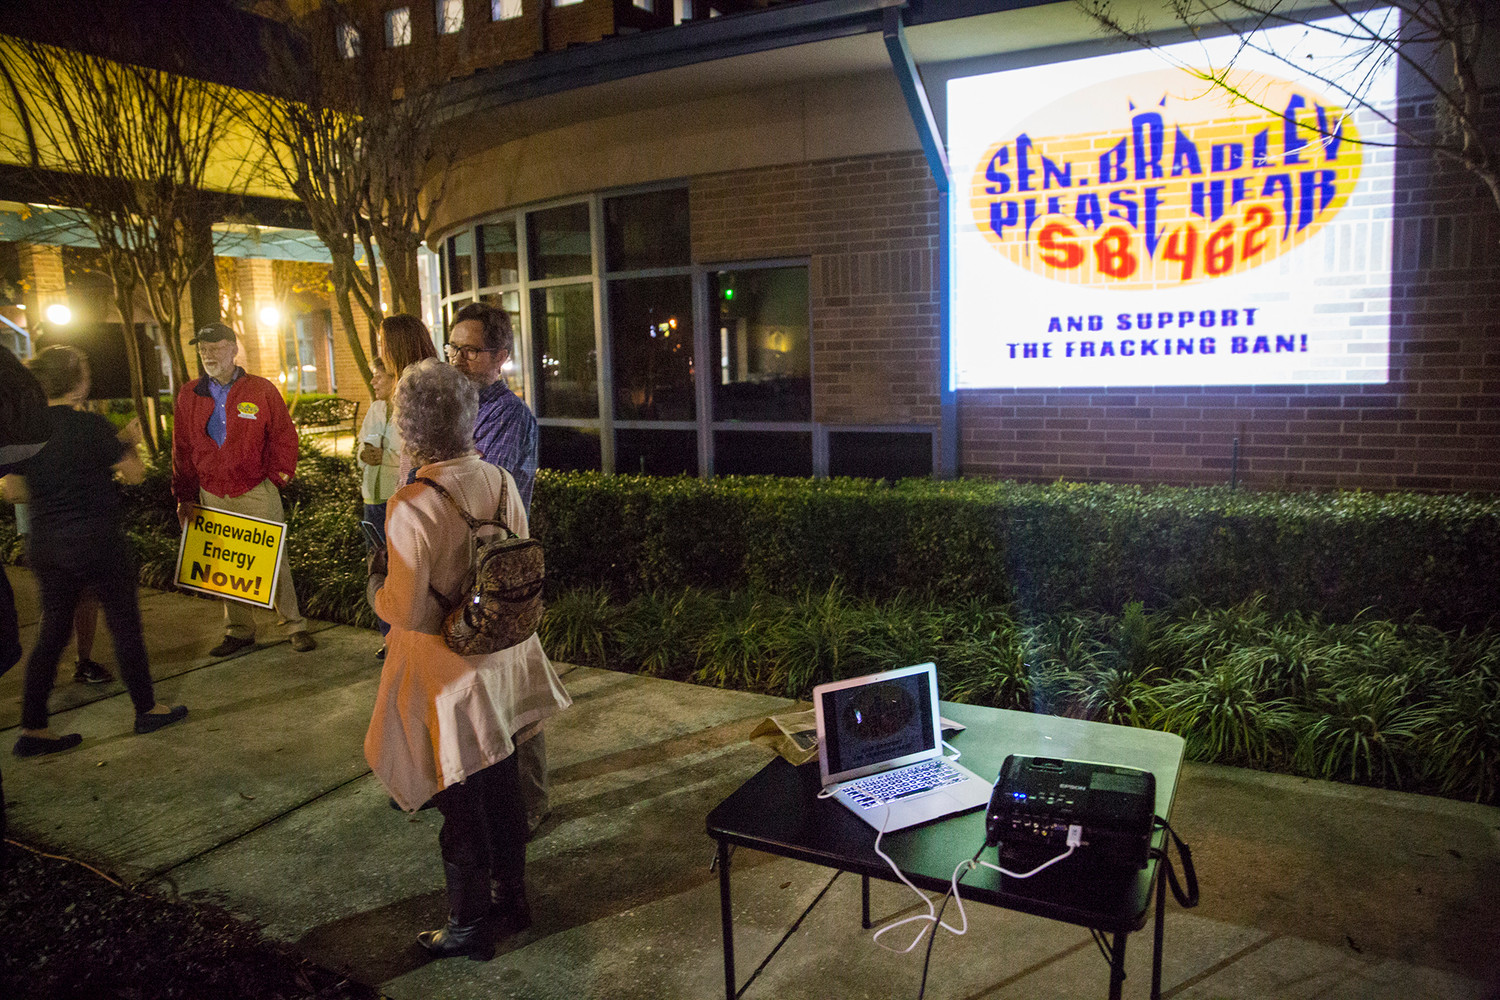 A group containing Sierra Club members and Doug Miller of reThink Energy Florida met outside Orange Park Town Hall last Thursday evening to project a Bat Signal-style graphic onto the building calling for Sen. Rob Bradley's help in passing Senate Bill 462 and keep fracking out of Florida.